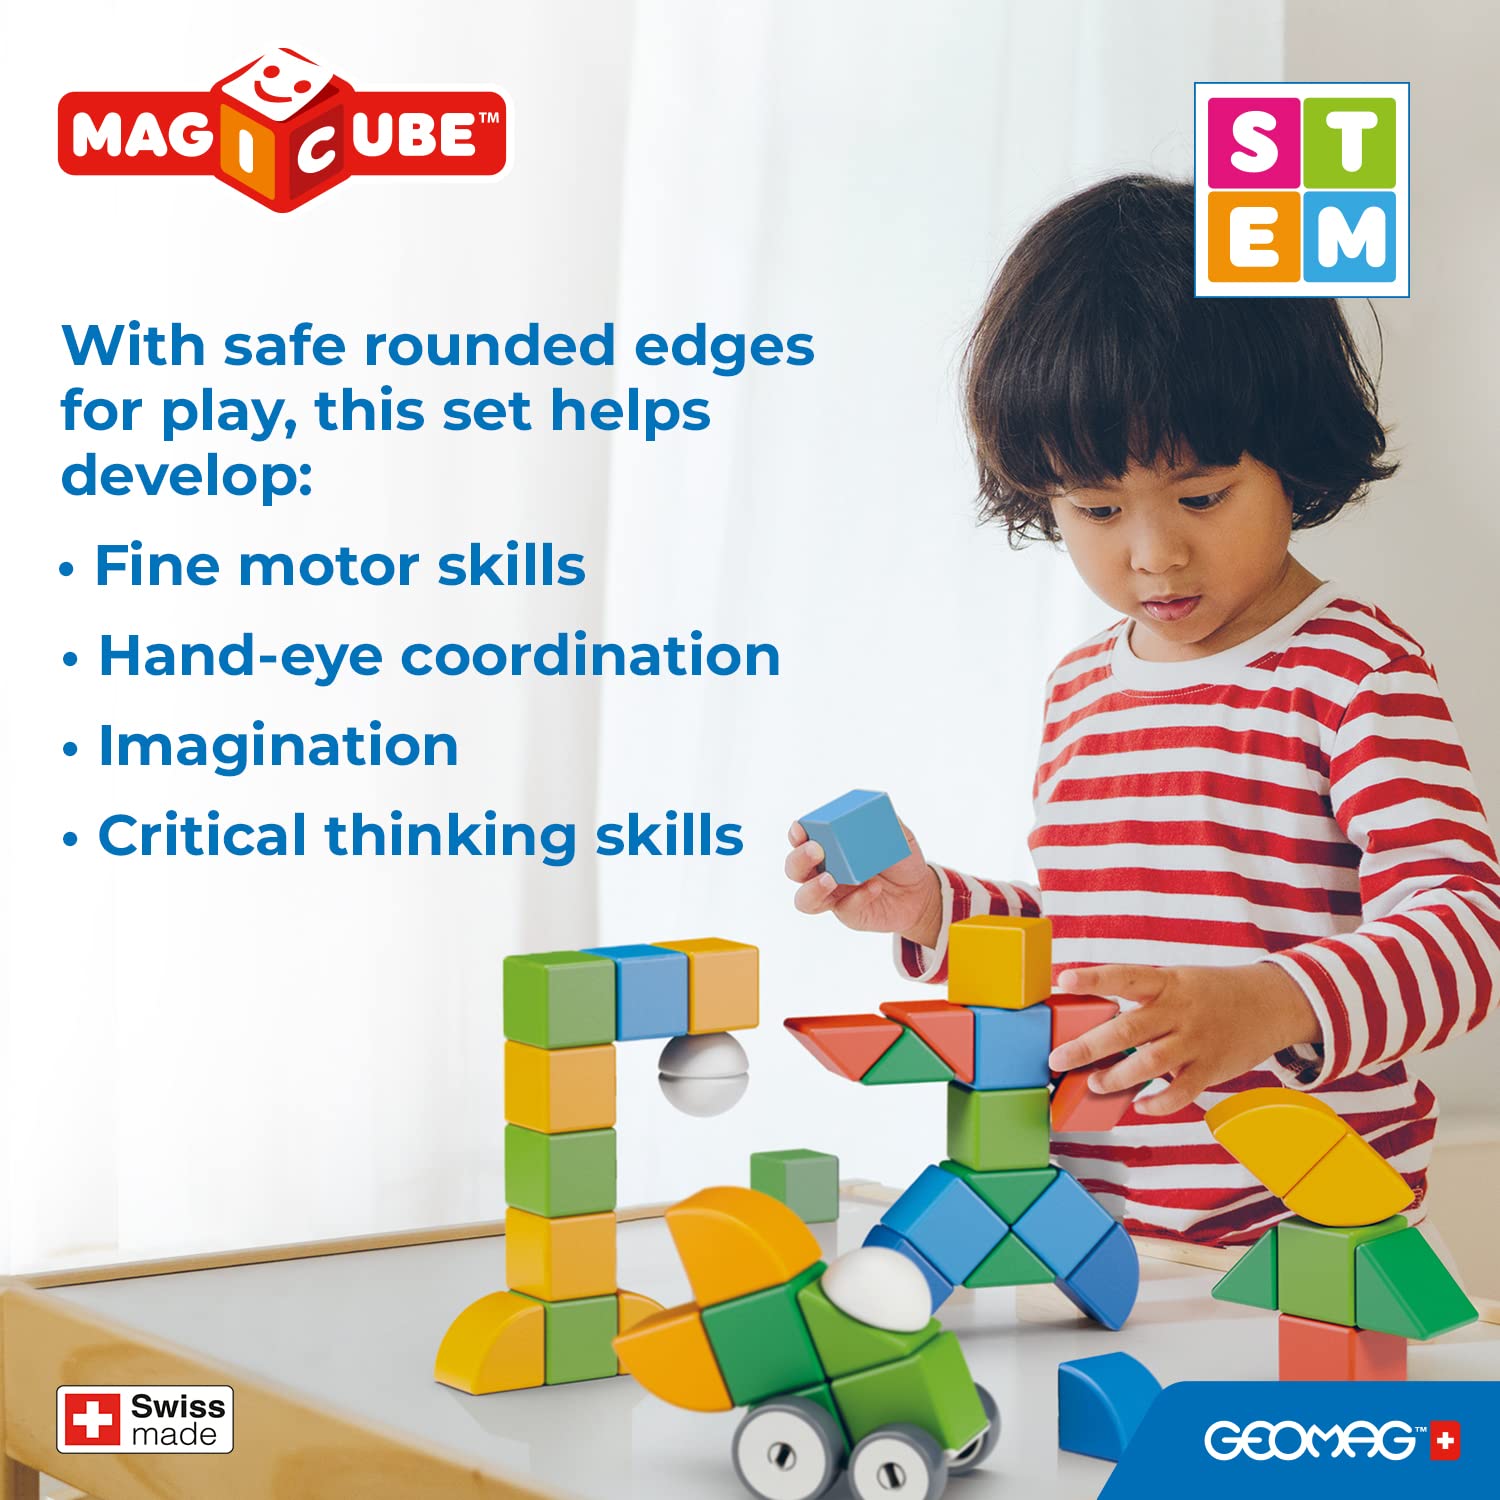 GEOMAG Swiss-Made MagiCube 13-Piece Magnetic Shapes & Wheels Building Set, Cars & Characters, Blocks for Toddlers & Kids Ages 1-5, STEM Montessori Educational Toy, Creativity, Imagination, Learning